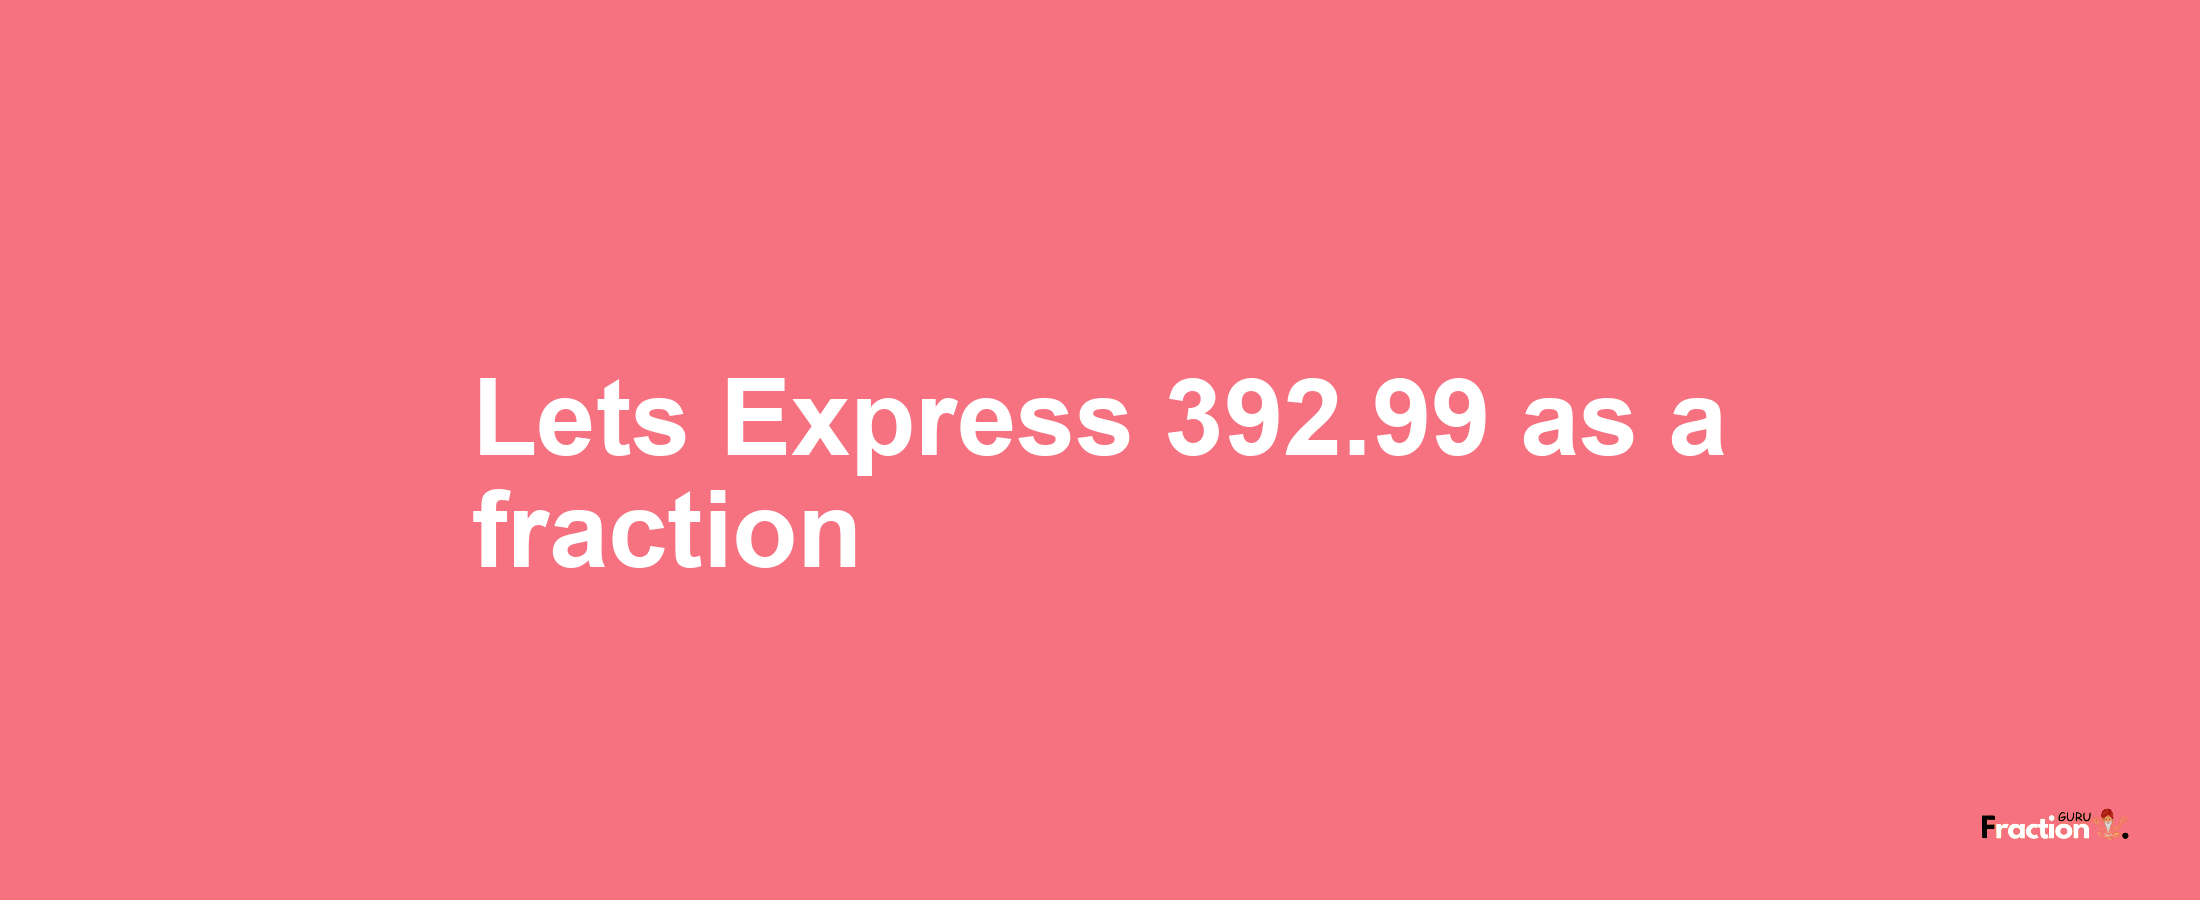 Lets Express 392.99 as afraction